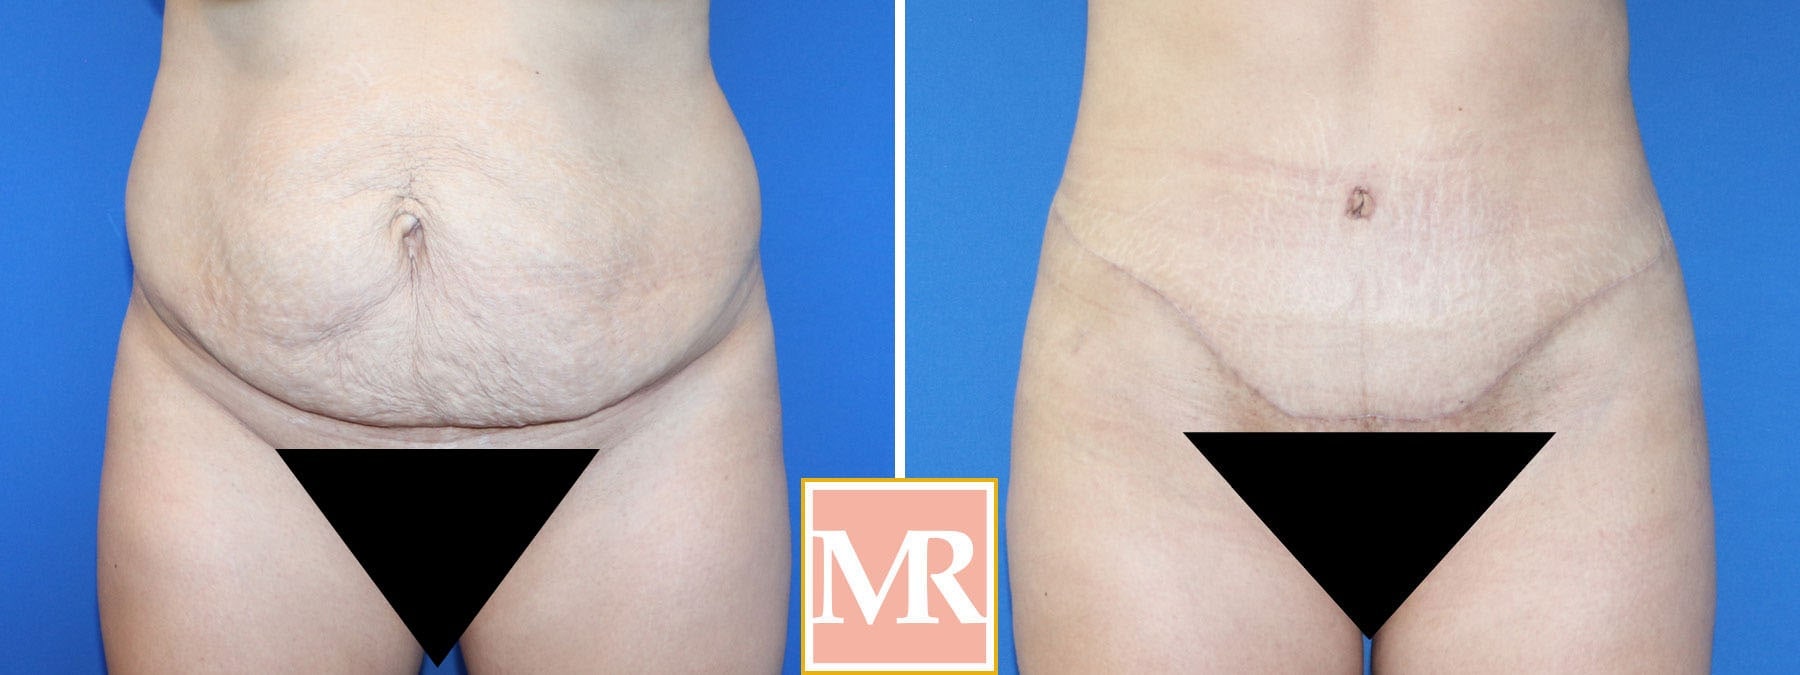 tummy tuck results millicent rovelo